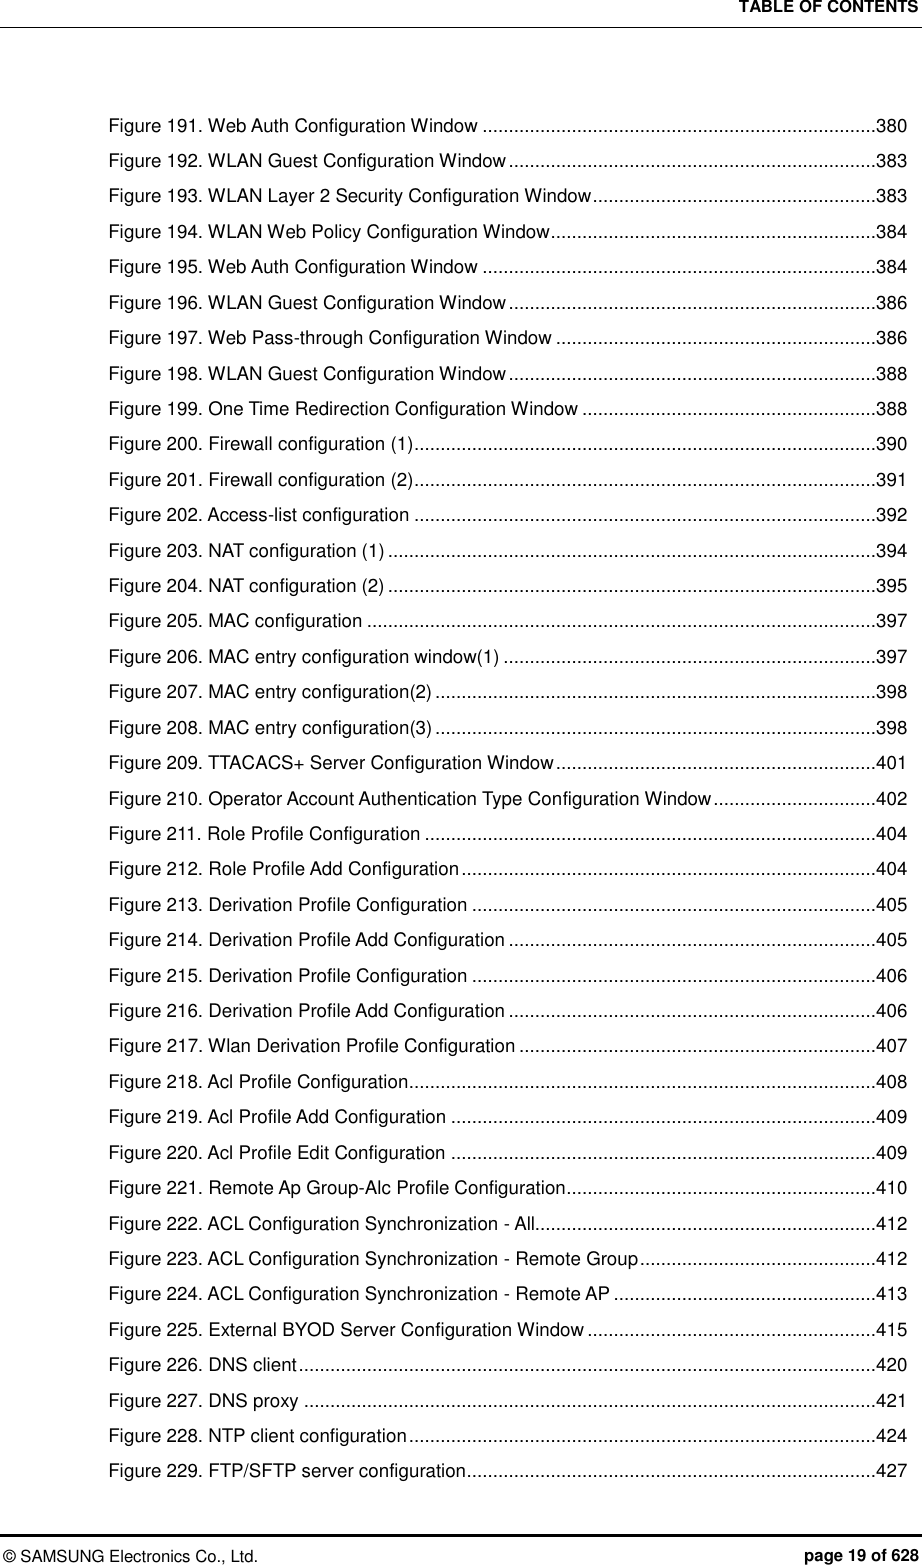 TABLE OF CONTENTS ©  SAMSUNG Electronics Co., Ltd.  page 19 of 628 Figure 191. Web Auth Configuration Window ...........................................................................380 Figure 192. WLAN Guest Configuration Window ......................................................................383 Figure 193. WLAN Layer 2 Security Configuration Window ......................................................383 Figure 194. WLAN Web Policy Configuration Window ..............................................................384 Figure 195. Web Auth Configuration Window ...........................................................................384 Figure 196. WLAN Guest Configuration Window ......................................................................386 Figure 197. Web Pass-through Configuration Window .............................................................386 Figure 198. WLAN Guest Configuration Window ......................................................................388 Figure 199. One Time Redirection Configuration Window ........................................................388 Figure 200. Firewall configuration (1) ........................................................................................390 Figure 201. Firewall configuration (2) ........................................................................................391 Figure 202. Access-list configuration ........................................................................................392 Figure 203. NAT configuration (1) .............................................................................................394 Figure 204. NAT configuration (2) .............................................................................................395 Figure 205. MAC configuration .................................................................................................397 Figure 206. MAC entry configuration window(1) .......................................................................397 Figure 207. MAC entry configuration(2) ....................................................................................398 Figure 208. MAC entry configuration(3) ....................................................................................398 Figure 209. TTACACS+ Server Configuration Window .............................................................401 Figure 210. Operator Account Authentication Type Configuration Window ...............................402 Figure 211. Role Profile Configuration ......................................................................................404 Figure 212. Role Profile Add Configuration ...............................................................................404 Figure 213. Derivation Profile Configuration .............................................................................405 Figure 214. Derivation Profile Add Configuration ......................................................................405 Figure 215. Derivation Profile Configuration .............................................................................406 Figure 216. Derivation Profile Add Configuration ......................................................................406 Figure 217. Wlan Derivation Profile Configuration ....................................................................407 Figure 218. Acl Profile Configuration .........................................................................................408 Figure 219. Acl Profile Add Configuration .................................................................................409 Figure 220. Acl Profile Edit Configuration .................................................................................409 Figure 221. Remote Ap Group-Alc Profile Configuration ...........................................................410 Figure 222. ACL Configuration Synchronization - All.................................................................412 Figure 223. ACL Configuration Synchronization - Remote Group .............................................412 Figure 224. ACL Configuration Synchronization - Remote AP ..................................................413 Figure 225. External BYOD Server Configuration Window .......................................................415 Figure 226. DNS client ..............................................................................................................420 Figure 227. DNS proxy .............................................................................................................421 Figure 228. NTP client configuration .........................................................................................424 Figure 229. FTP/SFTP server configuration ..............................................................................427 